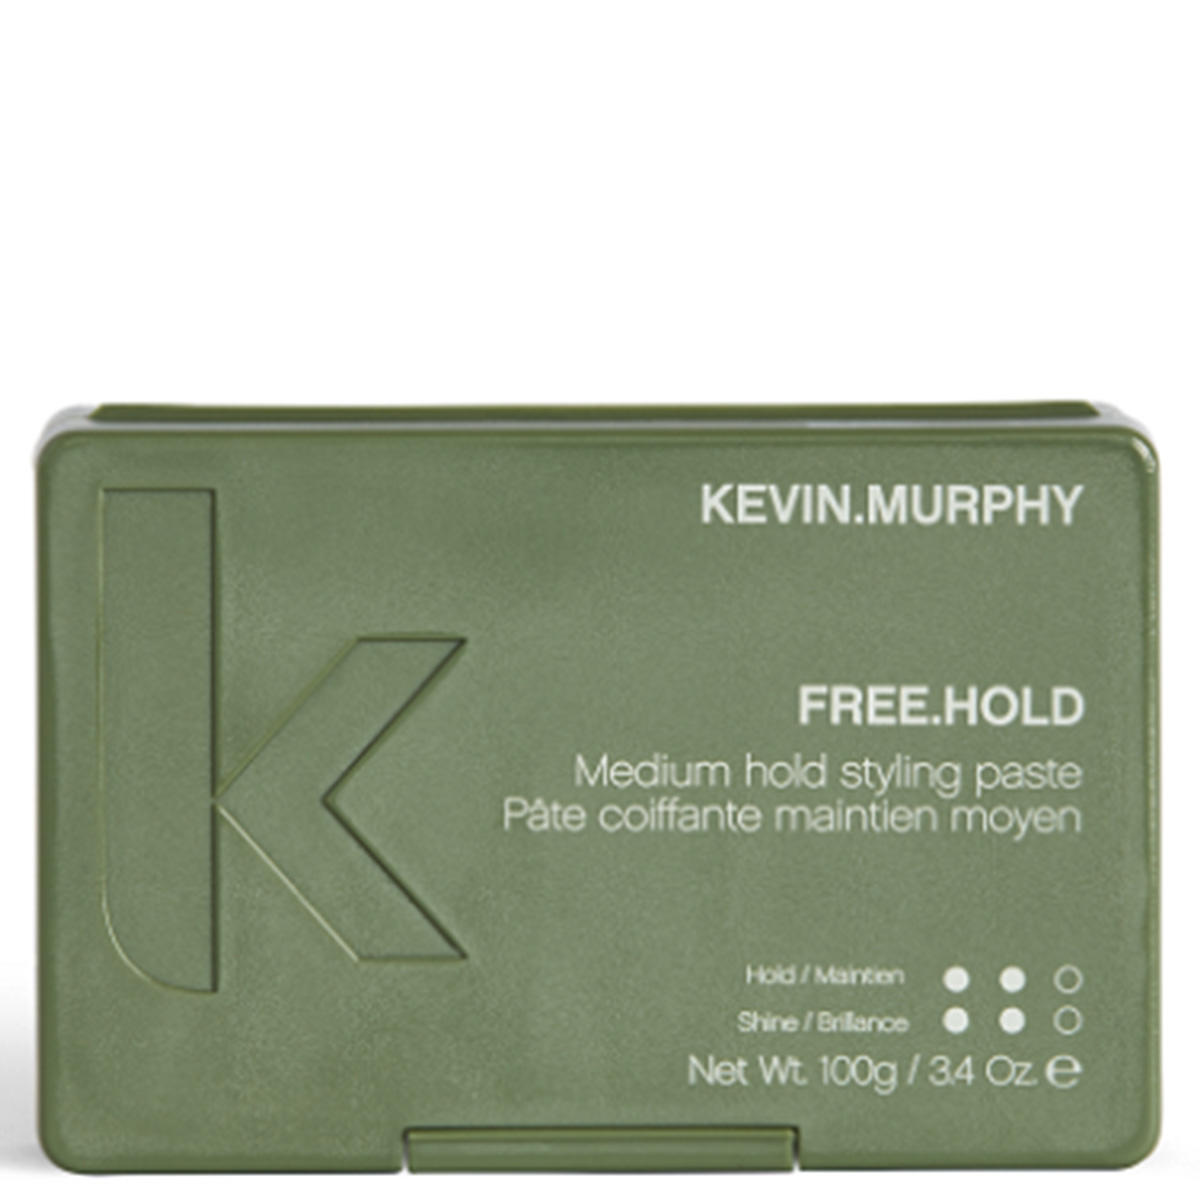 KEVIN.MURPHY FREE.HOLD  - 1